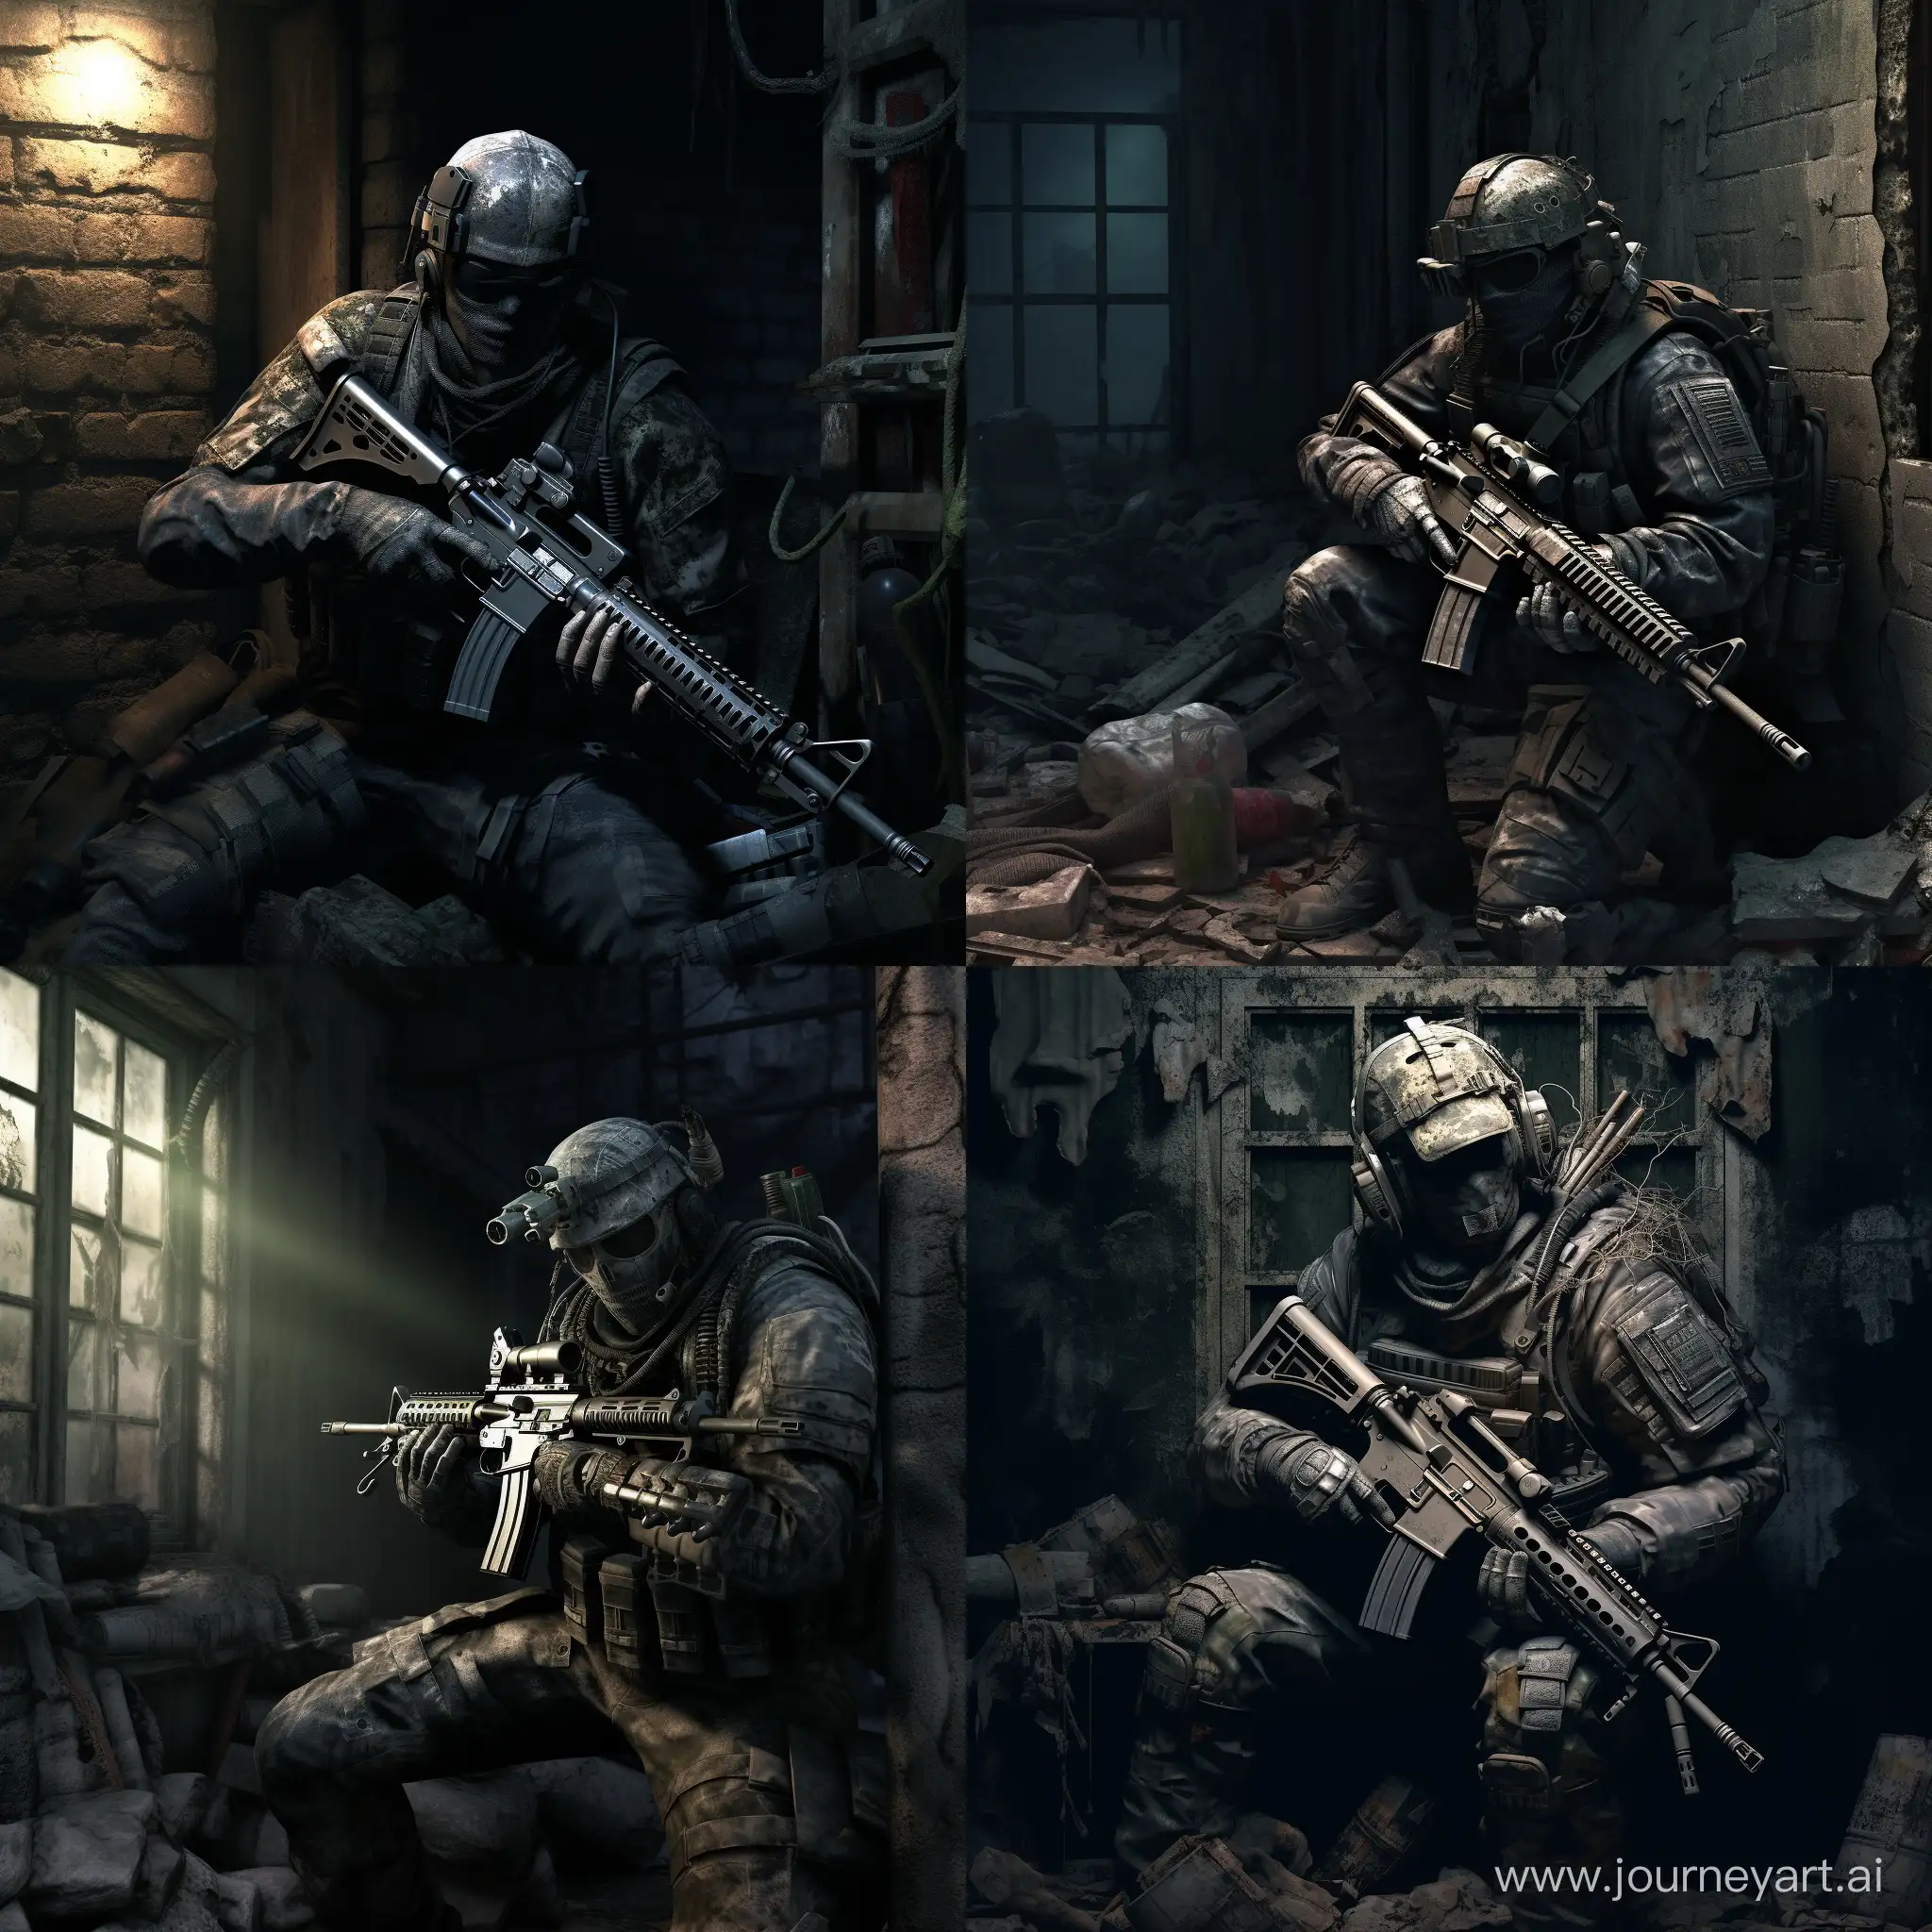  The ghost character in the game MW3 is sitting behind an old wall with Mesh written on it, and holding an automatic light machine gun in his hand.